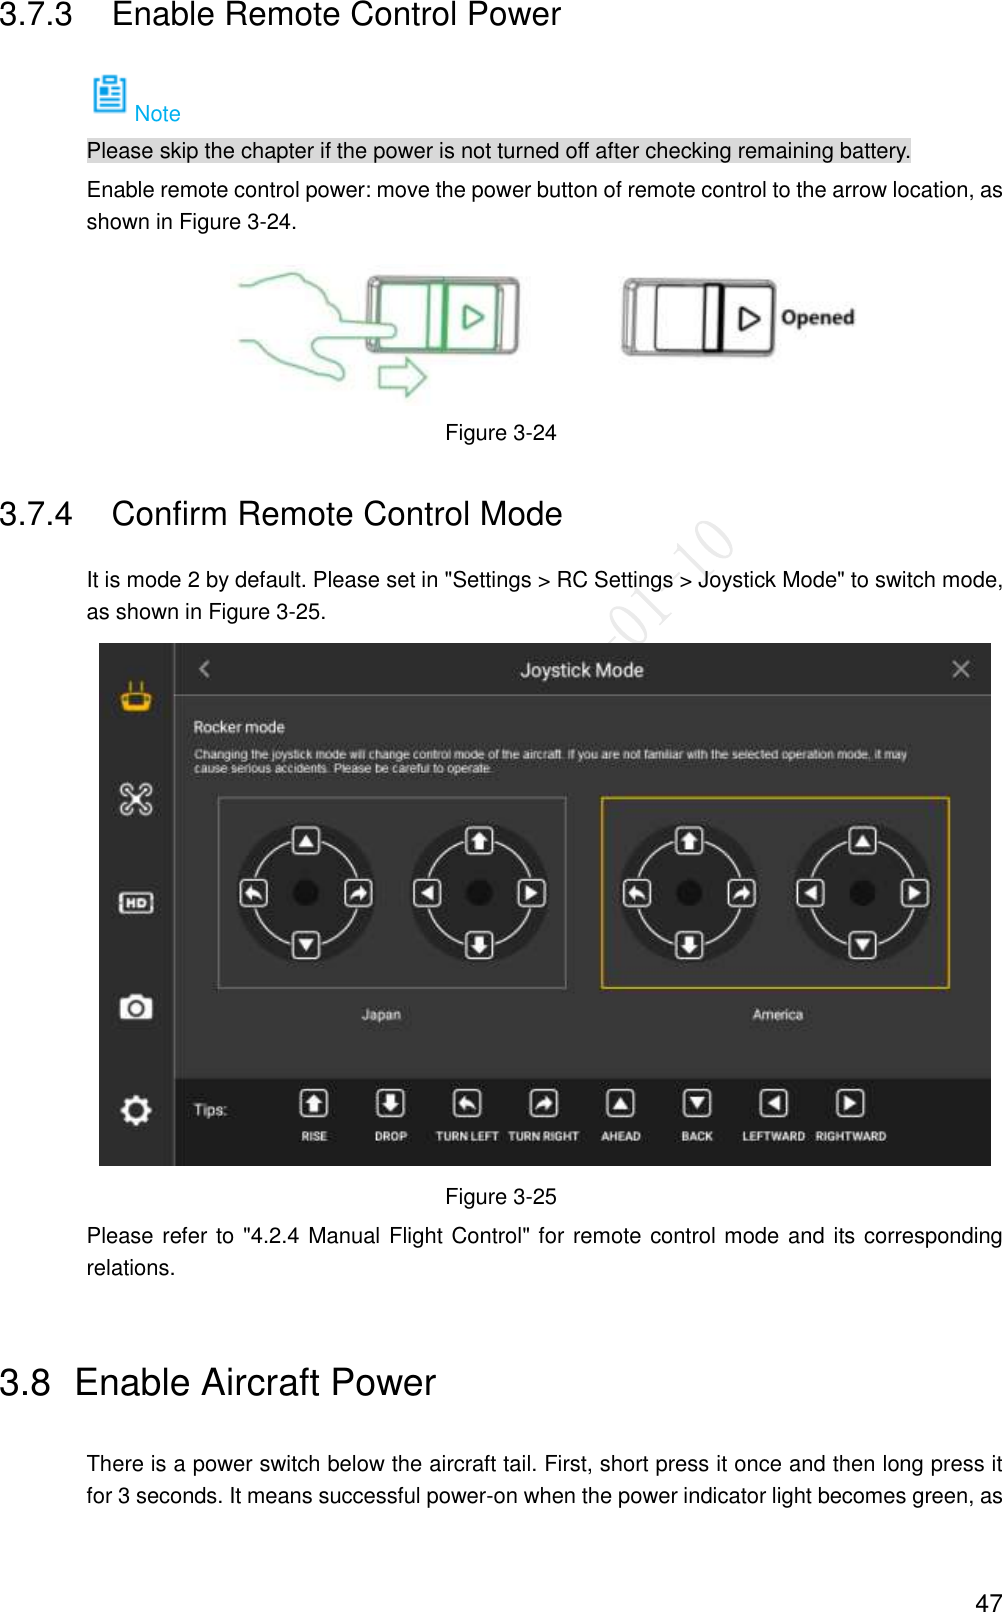  47 3.7.3  Enable Remote Control Power Note Please skip the chapter if the power is not turned off after checking remaining battery. Enable remote control power: move the power button of remote control to the arrow location, as shown in Figure 3-24.  Figure 3-24 3.7.4  Confirm Remote Control Mode It is mode 2 by default. Please set in &quot;Settings &gt; RC Settings &gt; Joystick Mode&quot; to switch mode, as shown in Figure 3-25.  Figure 3-25 Please refer to &quot;4.2.4 Manual Flight Control&quot; for remote control mode and its corresponding relations. 3.8  Enable Aircraft Power There is a power switch below the aircraft tail. First, short press it once and then long press it for 3 seconds. It means successful power-on when the power indicator light becomes green, as 